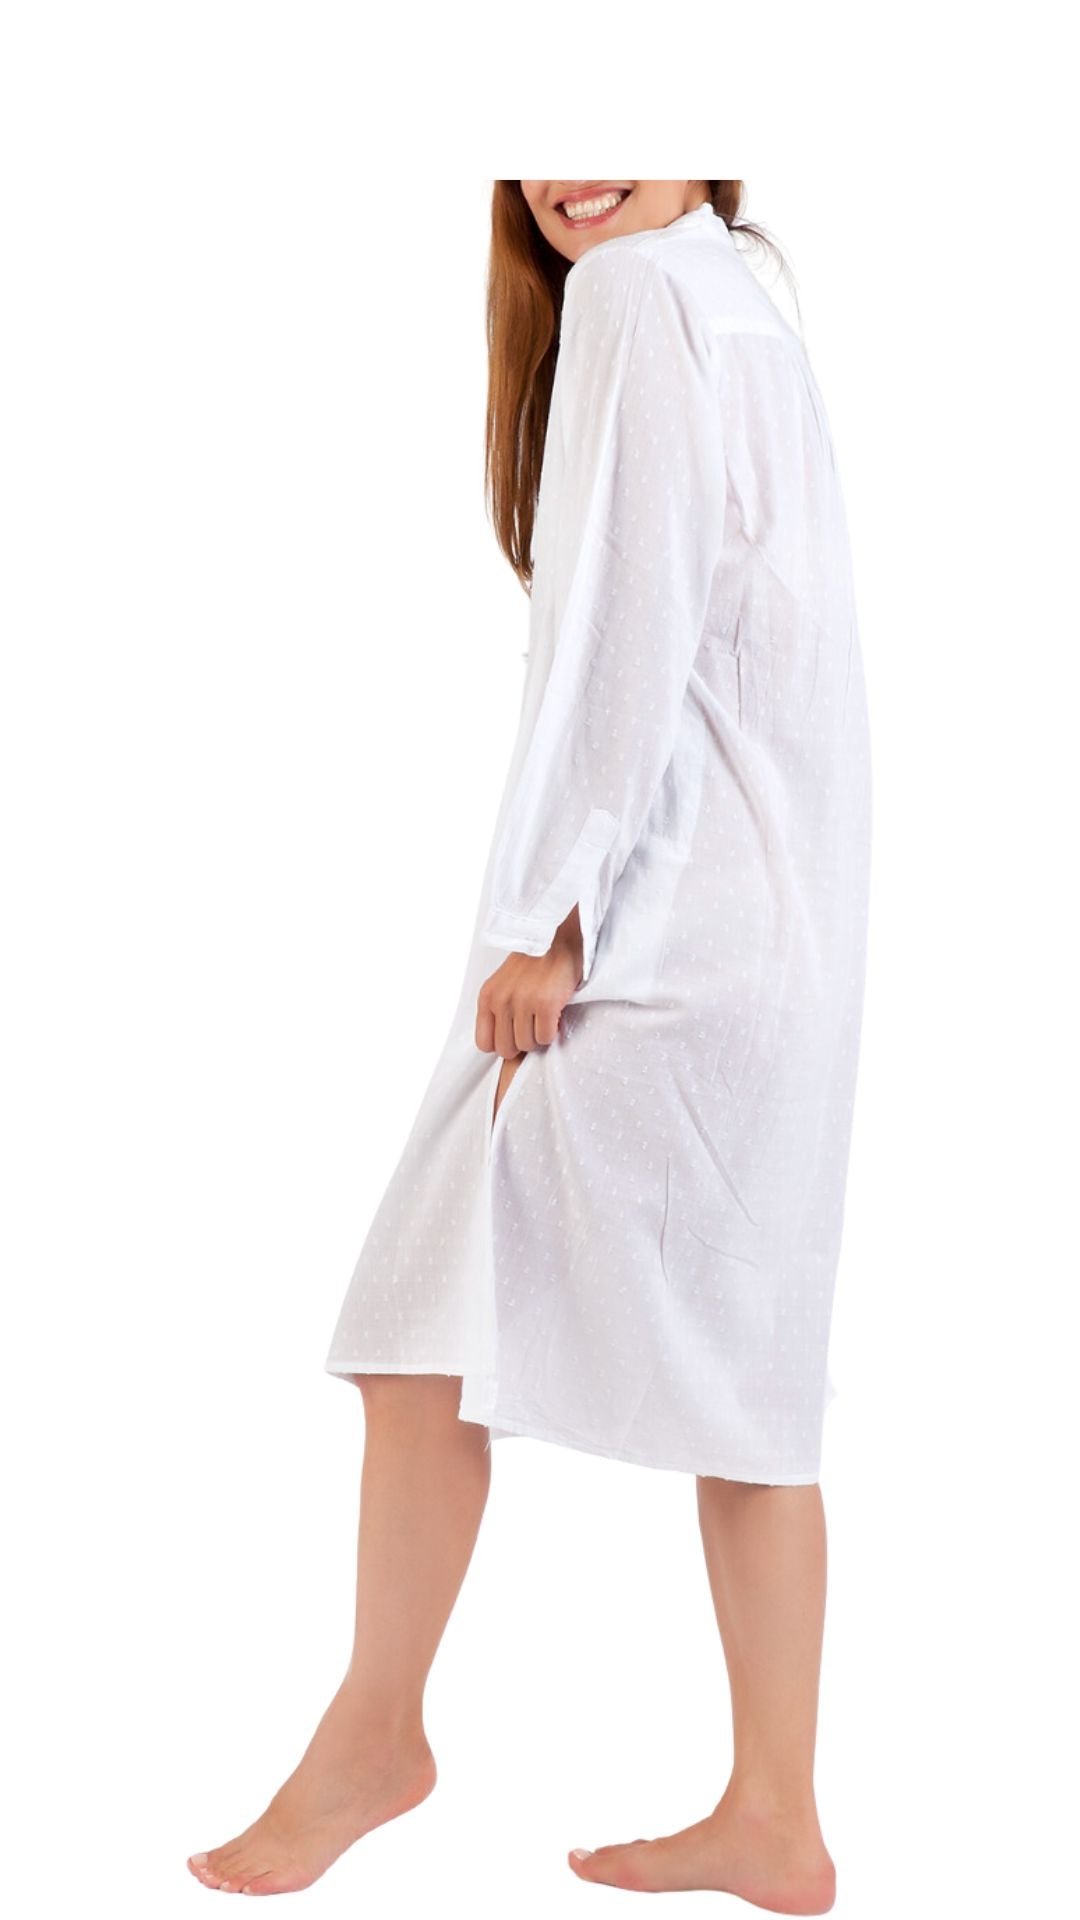 100% light white cotton night gown for hospital or maternity wear 